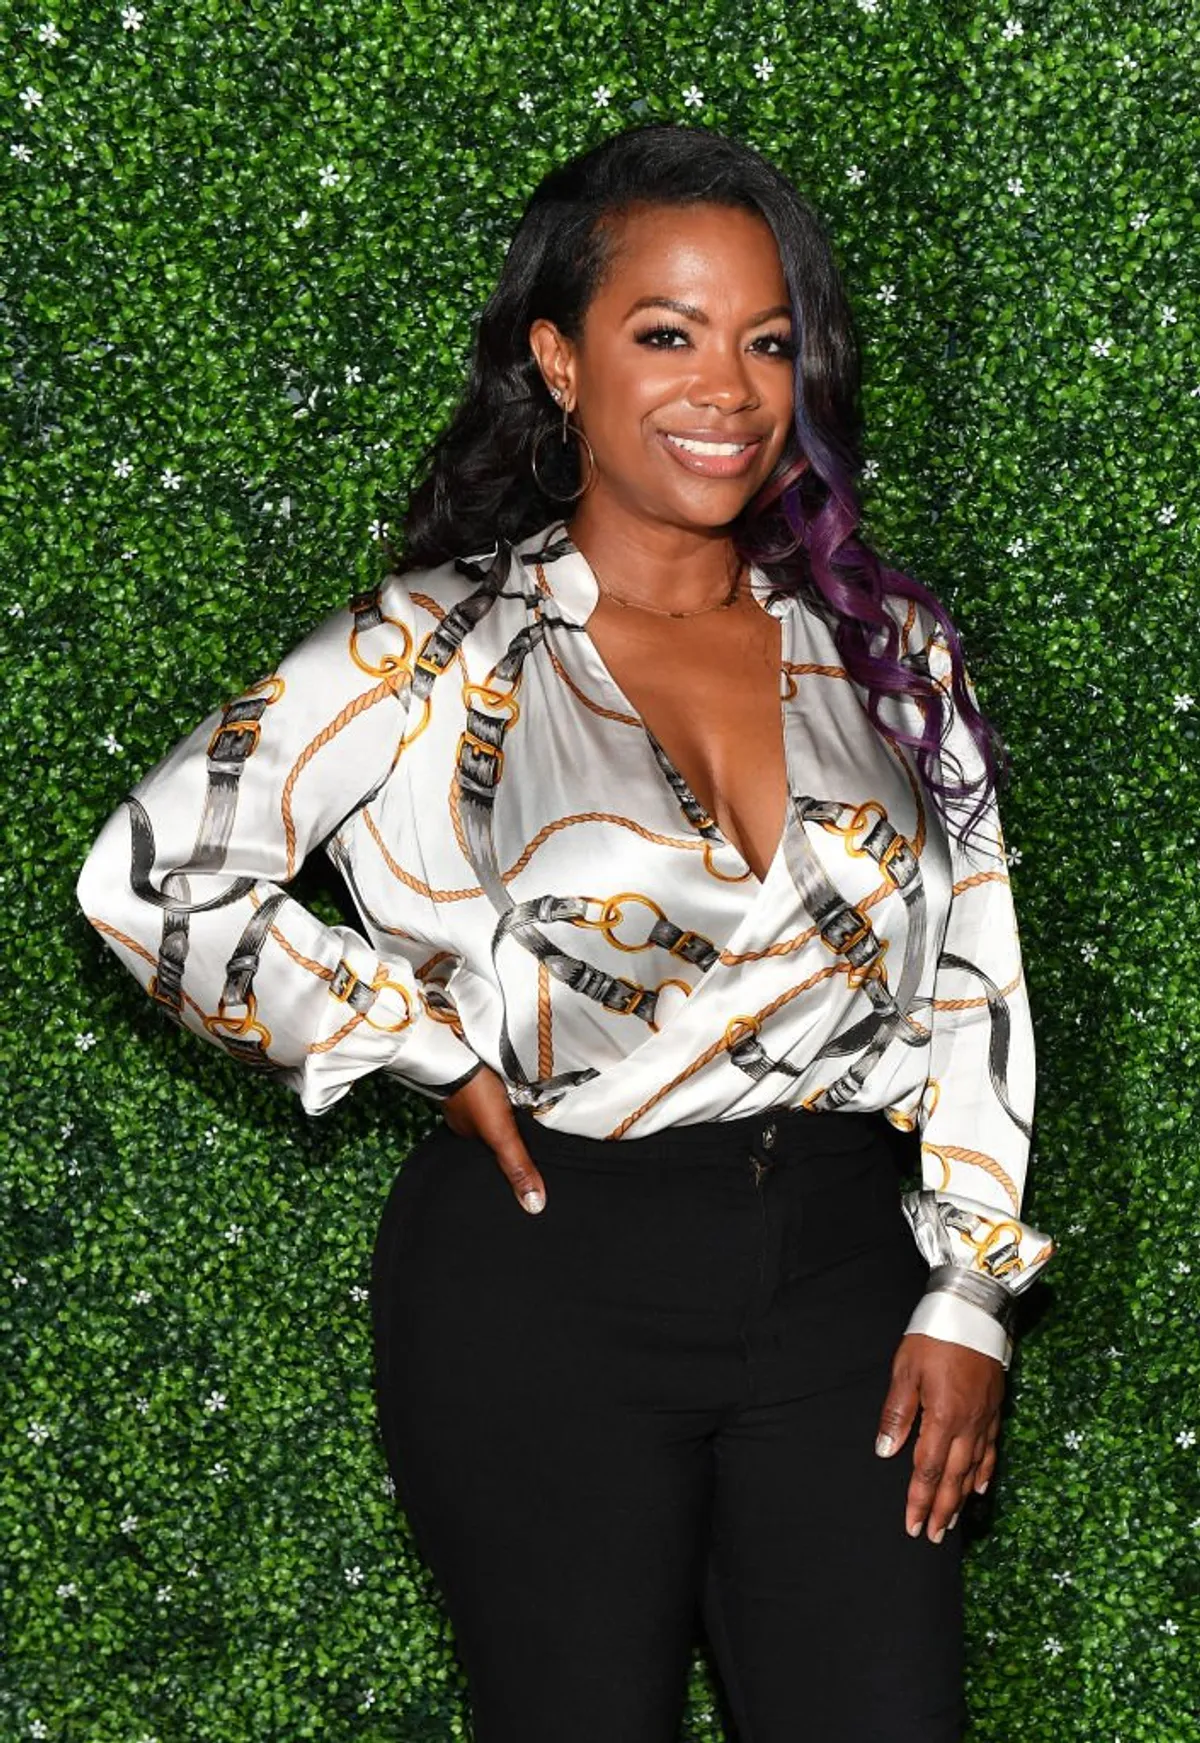 Kandi Burruss attends the Reelz on Wheels benefit event at Atlanta, Georgia in August 2020. | Photo: Getty Images